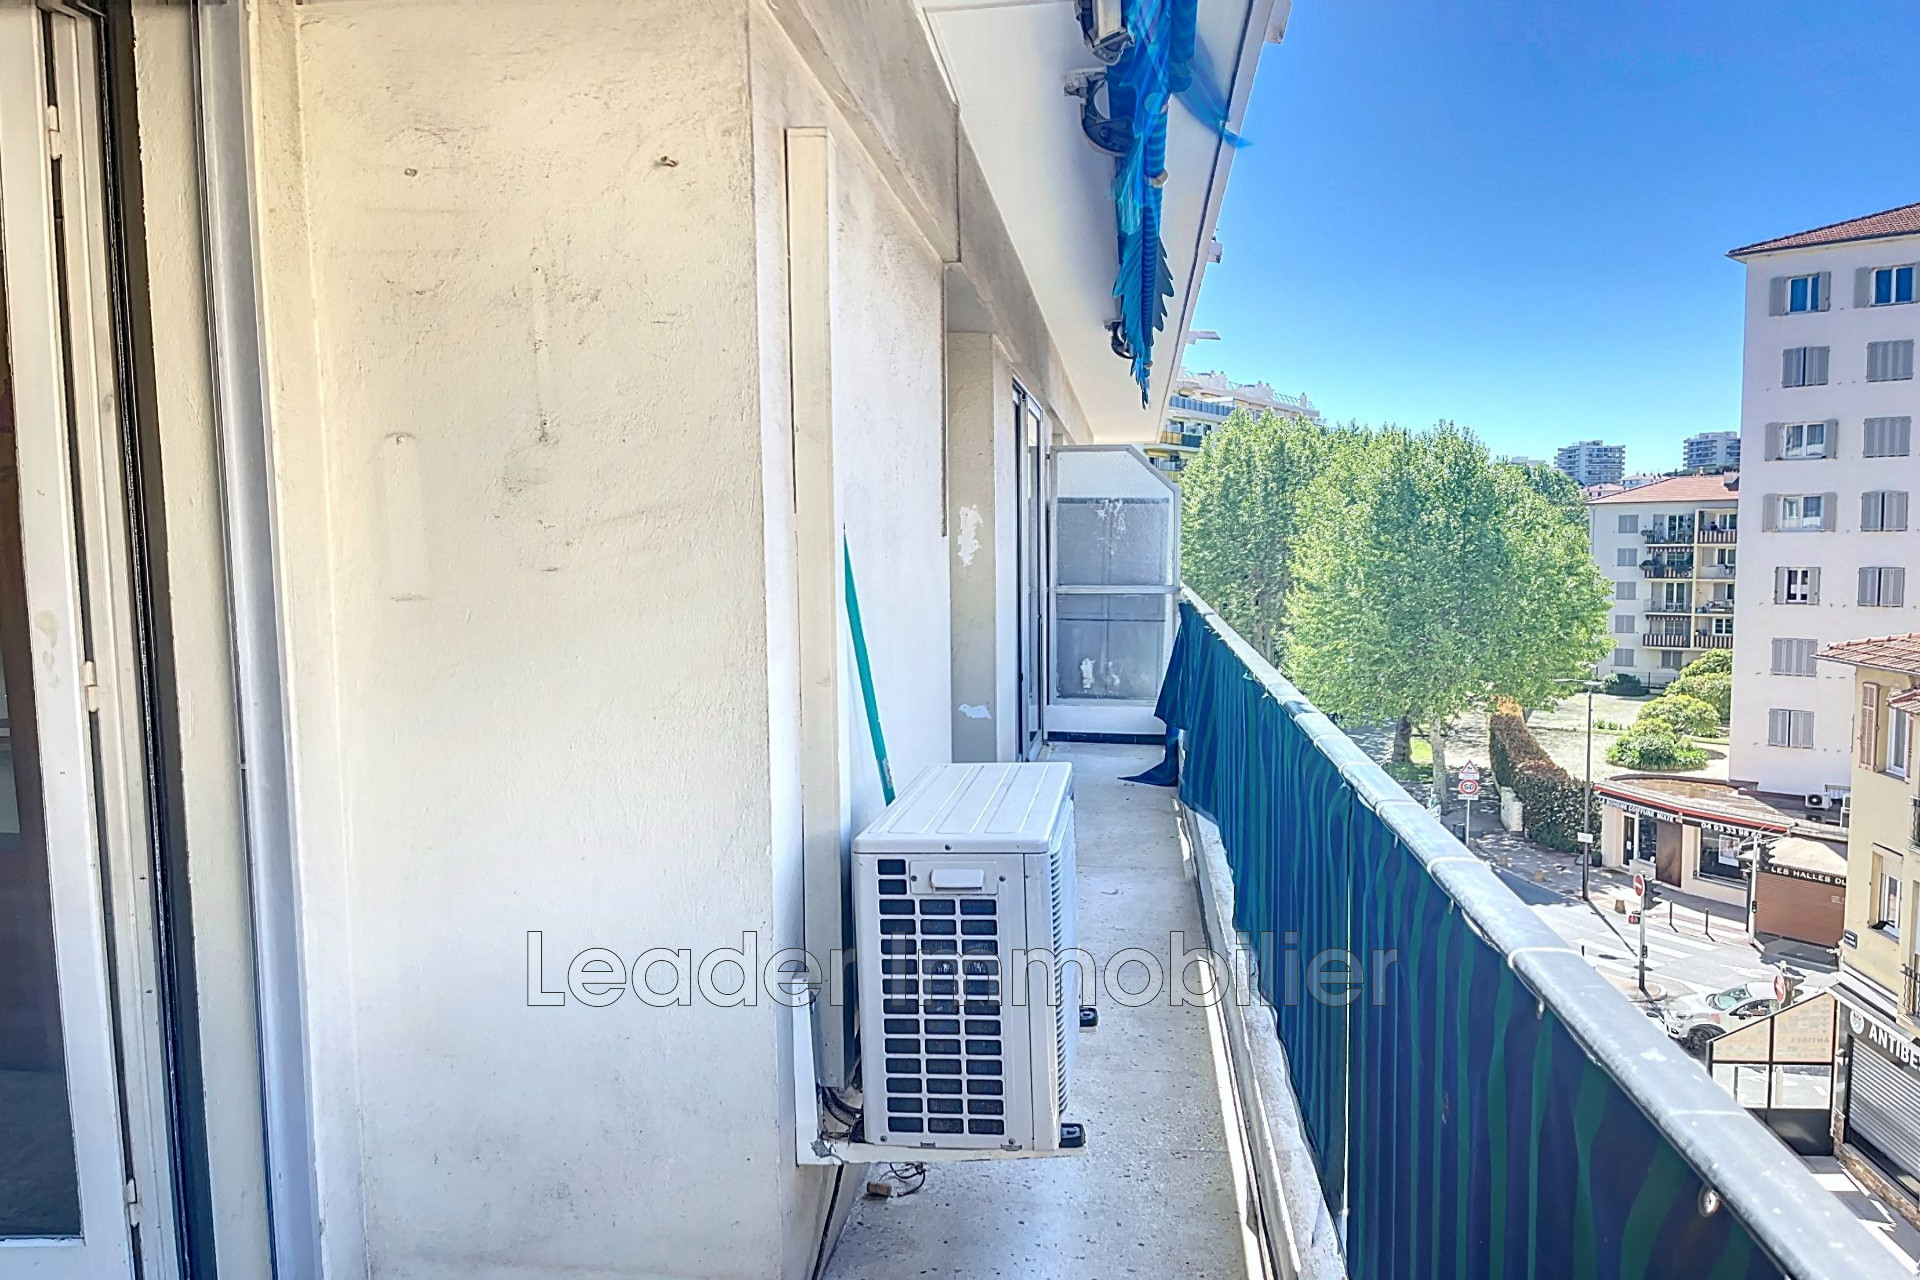 Vente Appartement 53m² à Antibes (06600) - Leader Immobilier